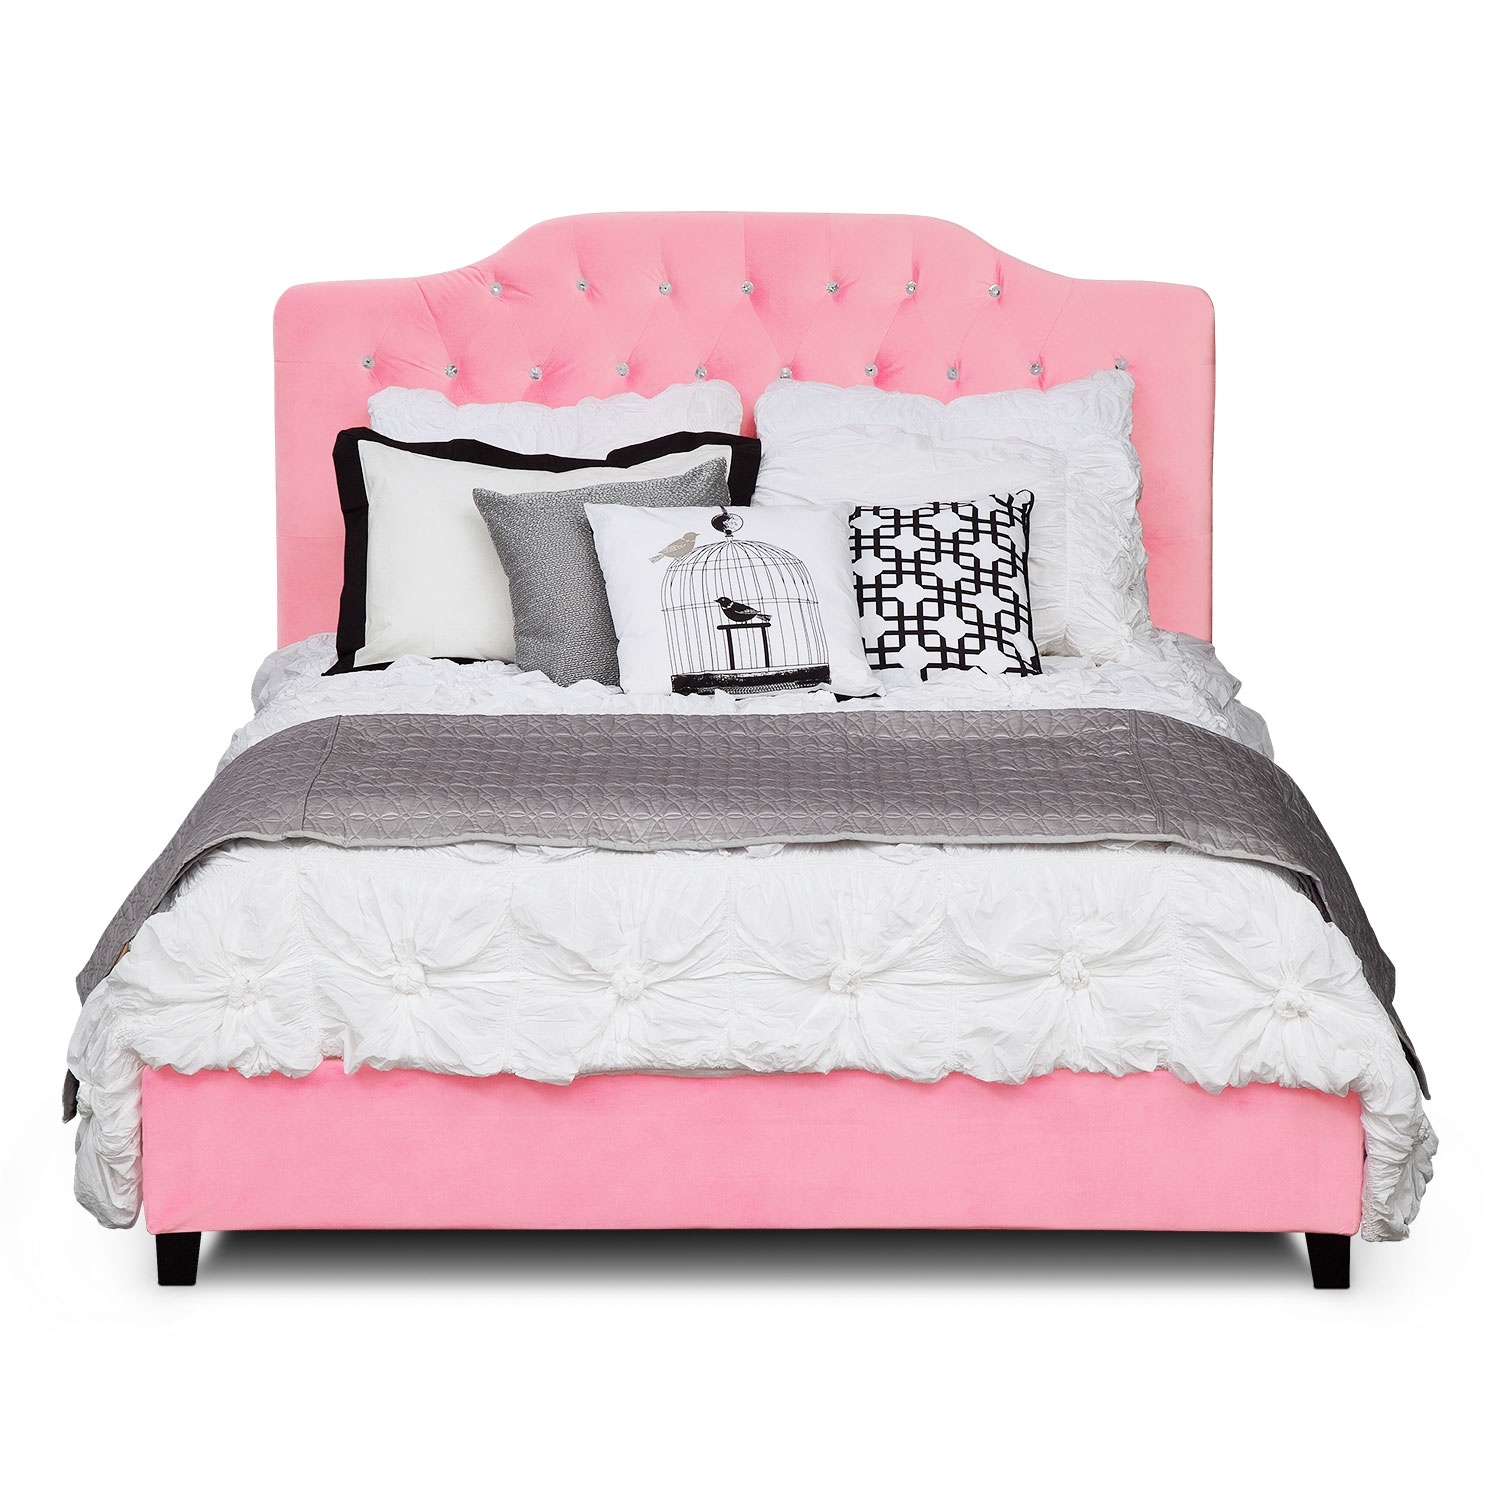 Valerie Queen Bed - Pink | Value City Furniture and Mattresses